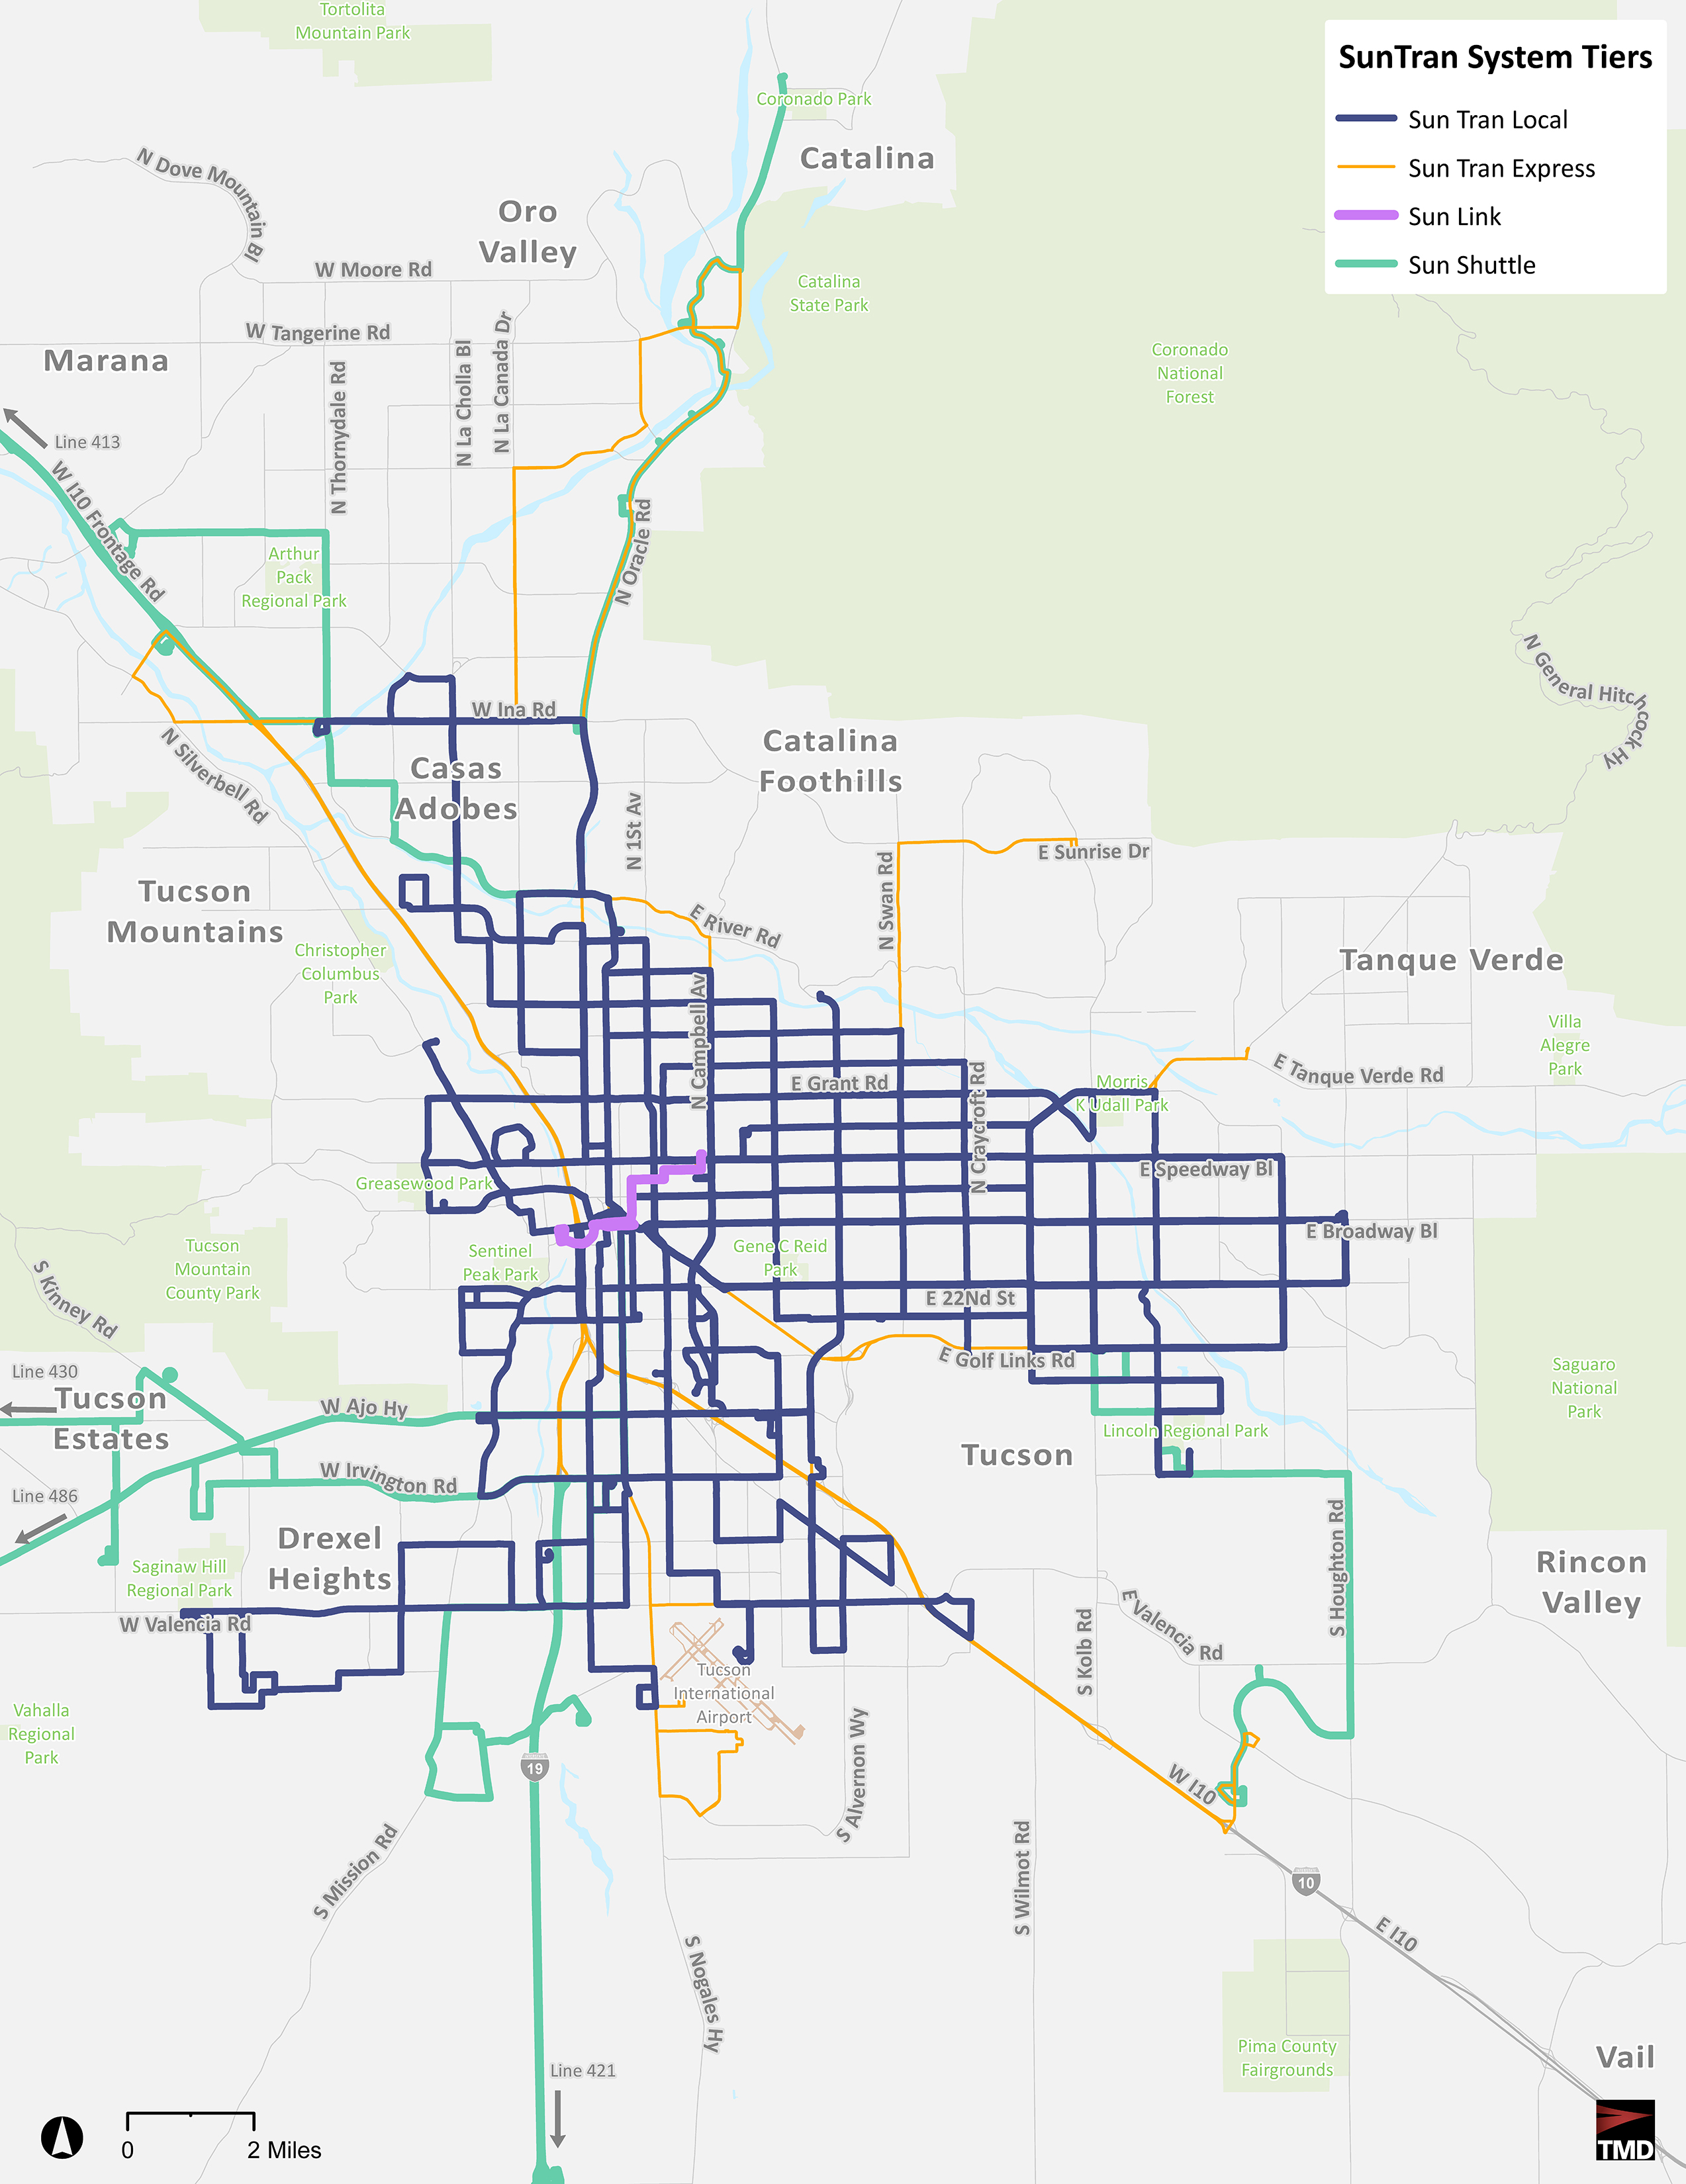 This map shows all of the current Sun Tran system service routes in the Tucson and greater Tucson area.